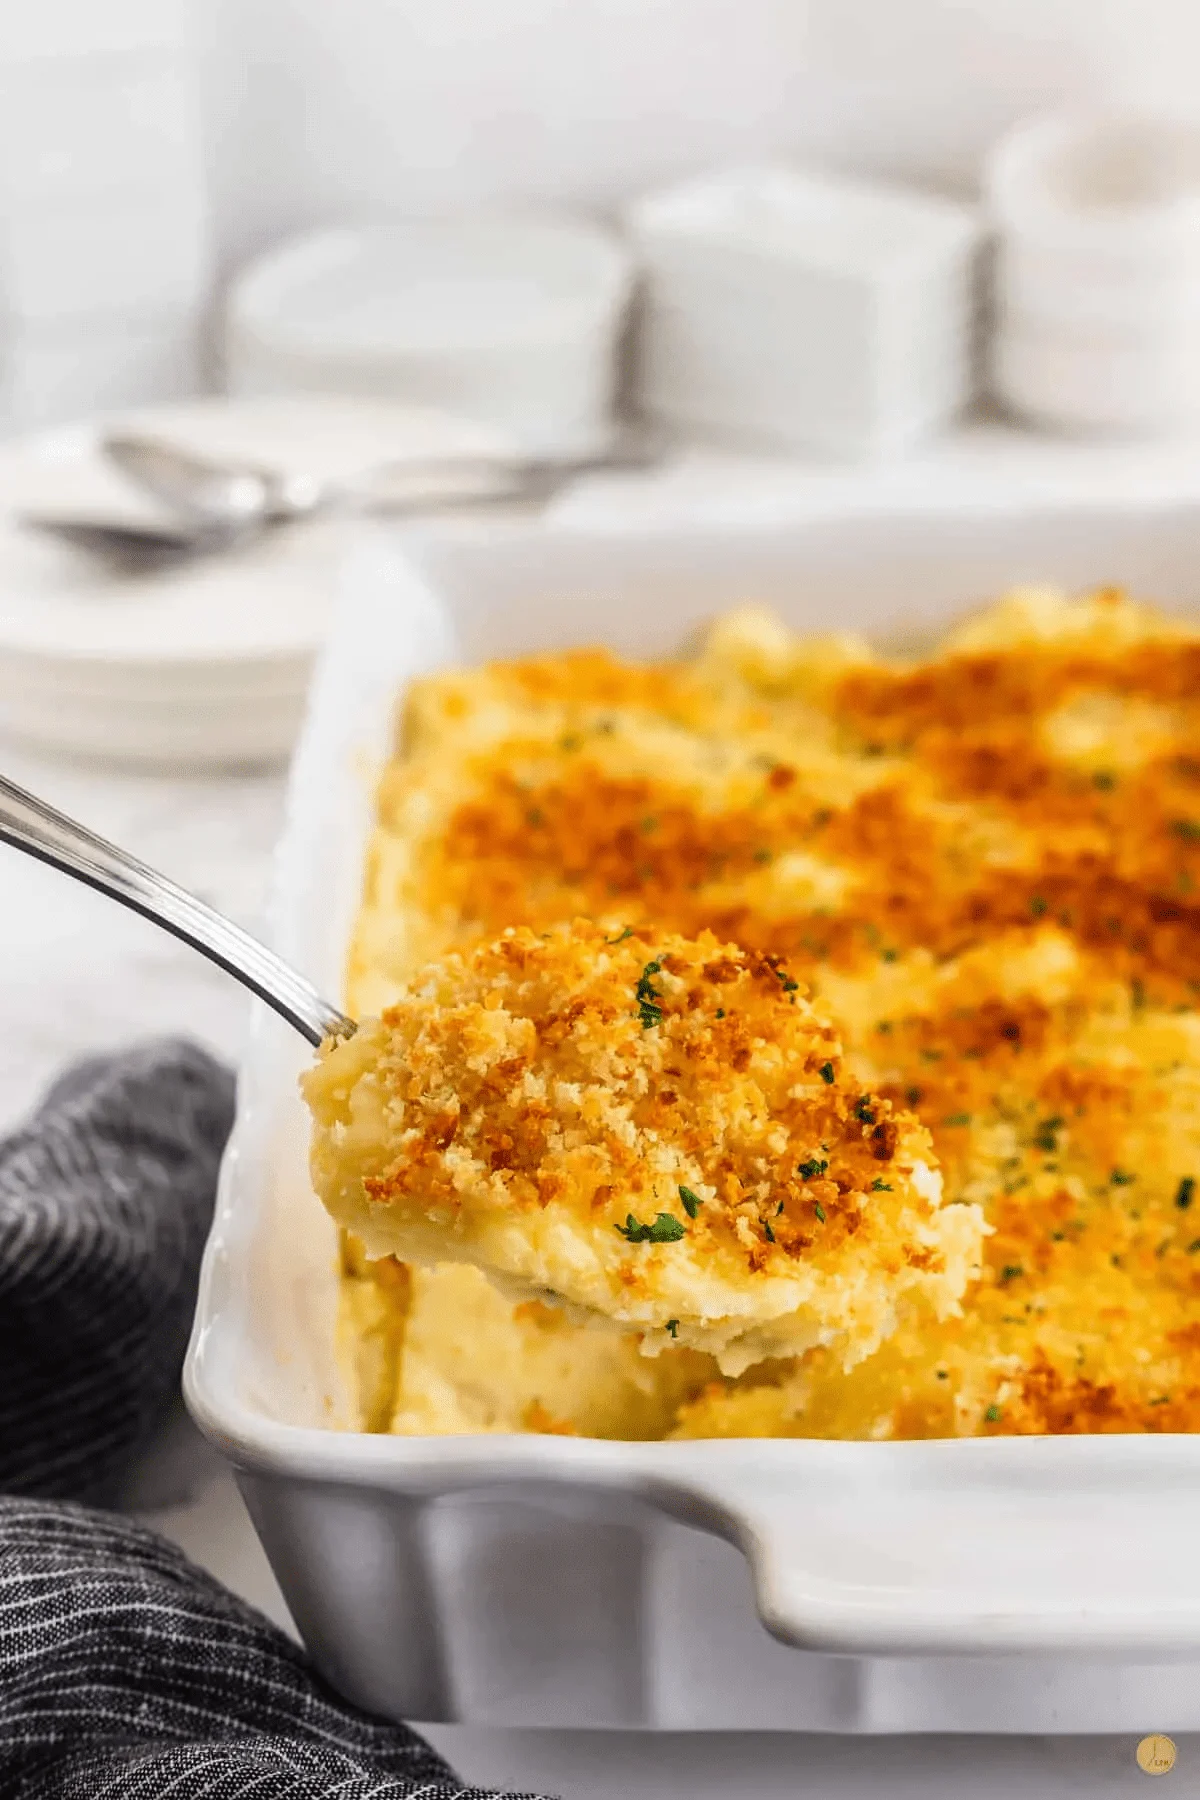 Mashed potato gratin in a white dish with a spoon lifting a portion out.